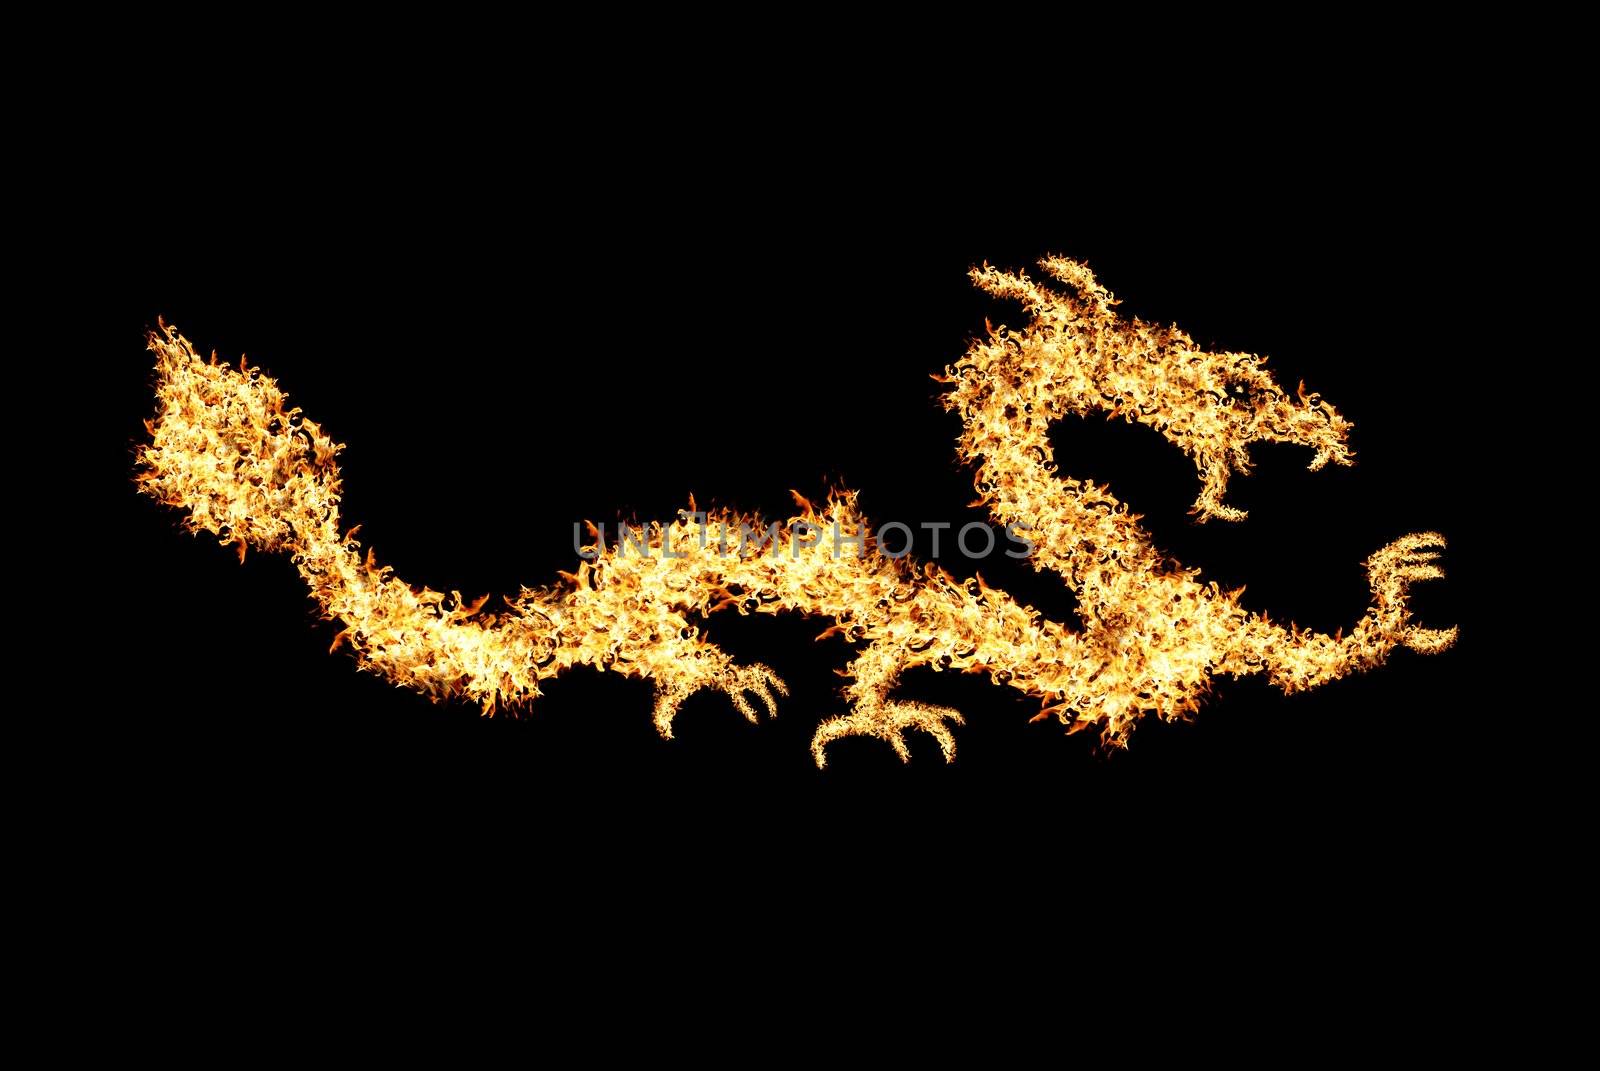 Abstract fiery dragon. Illustration number two on black backgrou by sasilsolutions